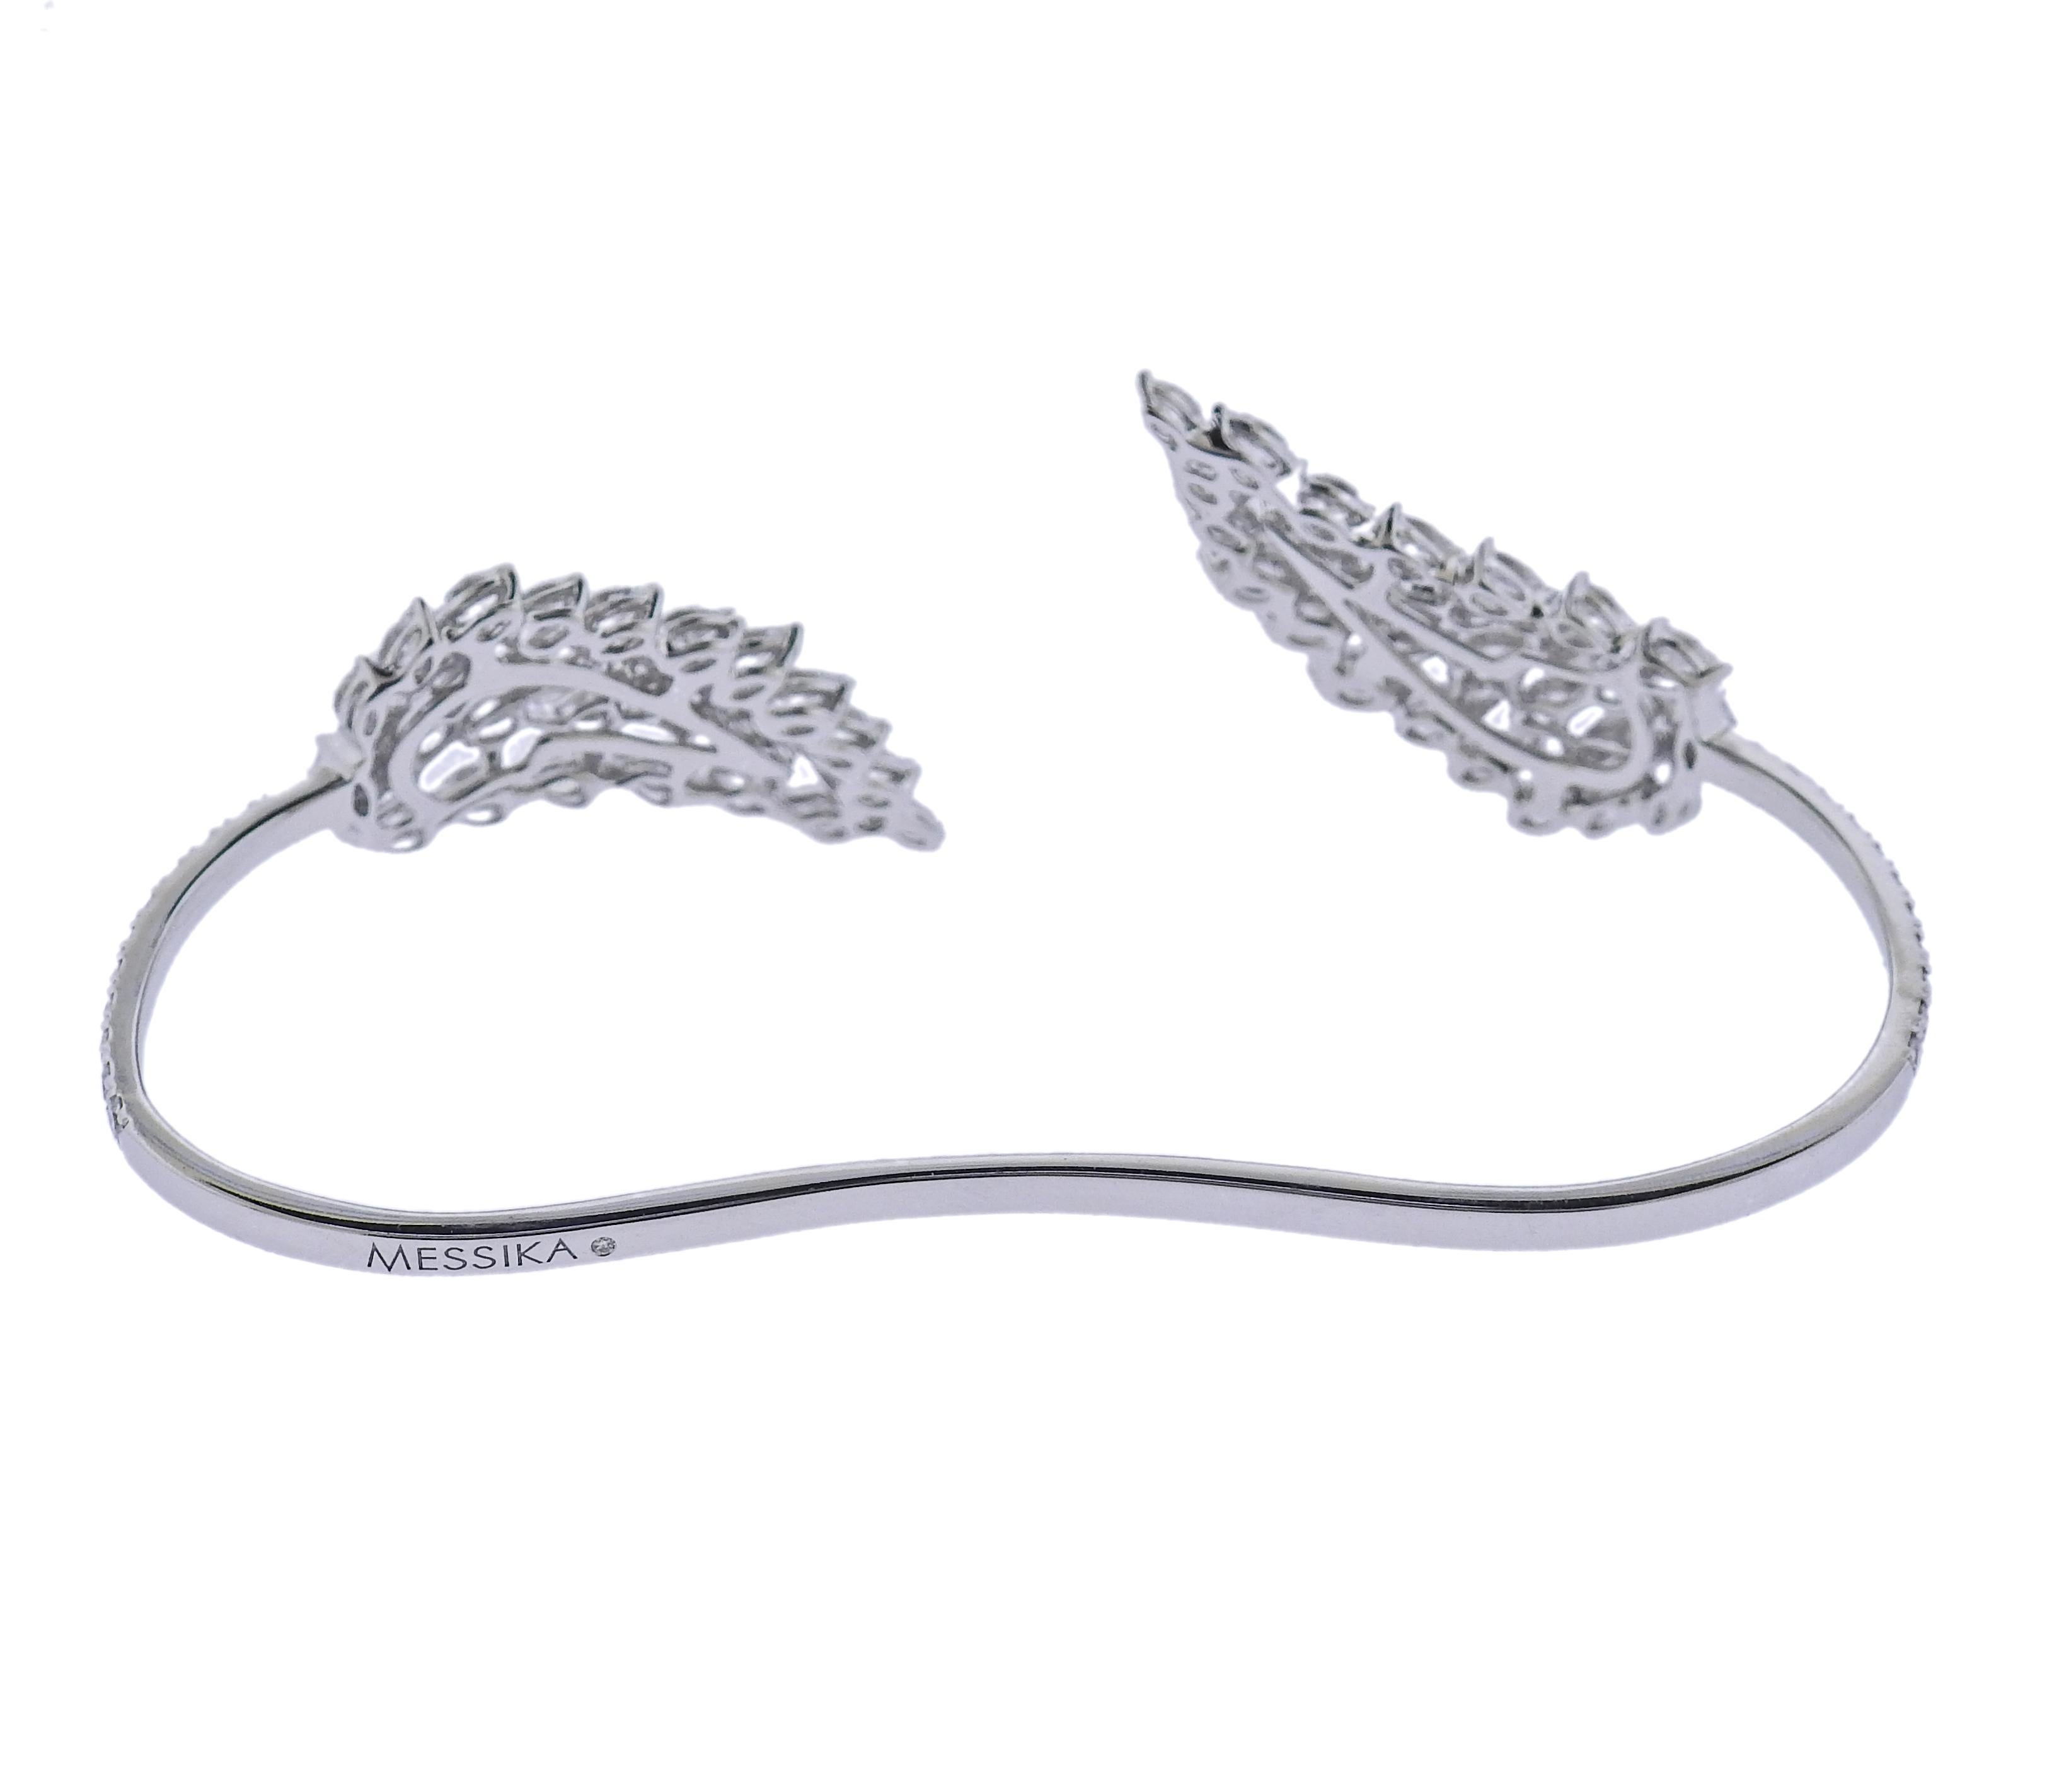 18k white gold Angel bracelet by Messika, set with 4.70ctw G/VS diamonds. Retail $33000. New, store sample, comes with box.  Bracelet will fit approx. 6.5